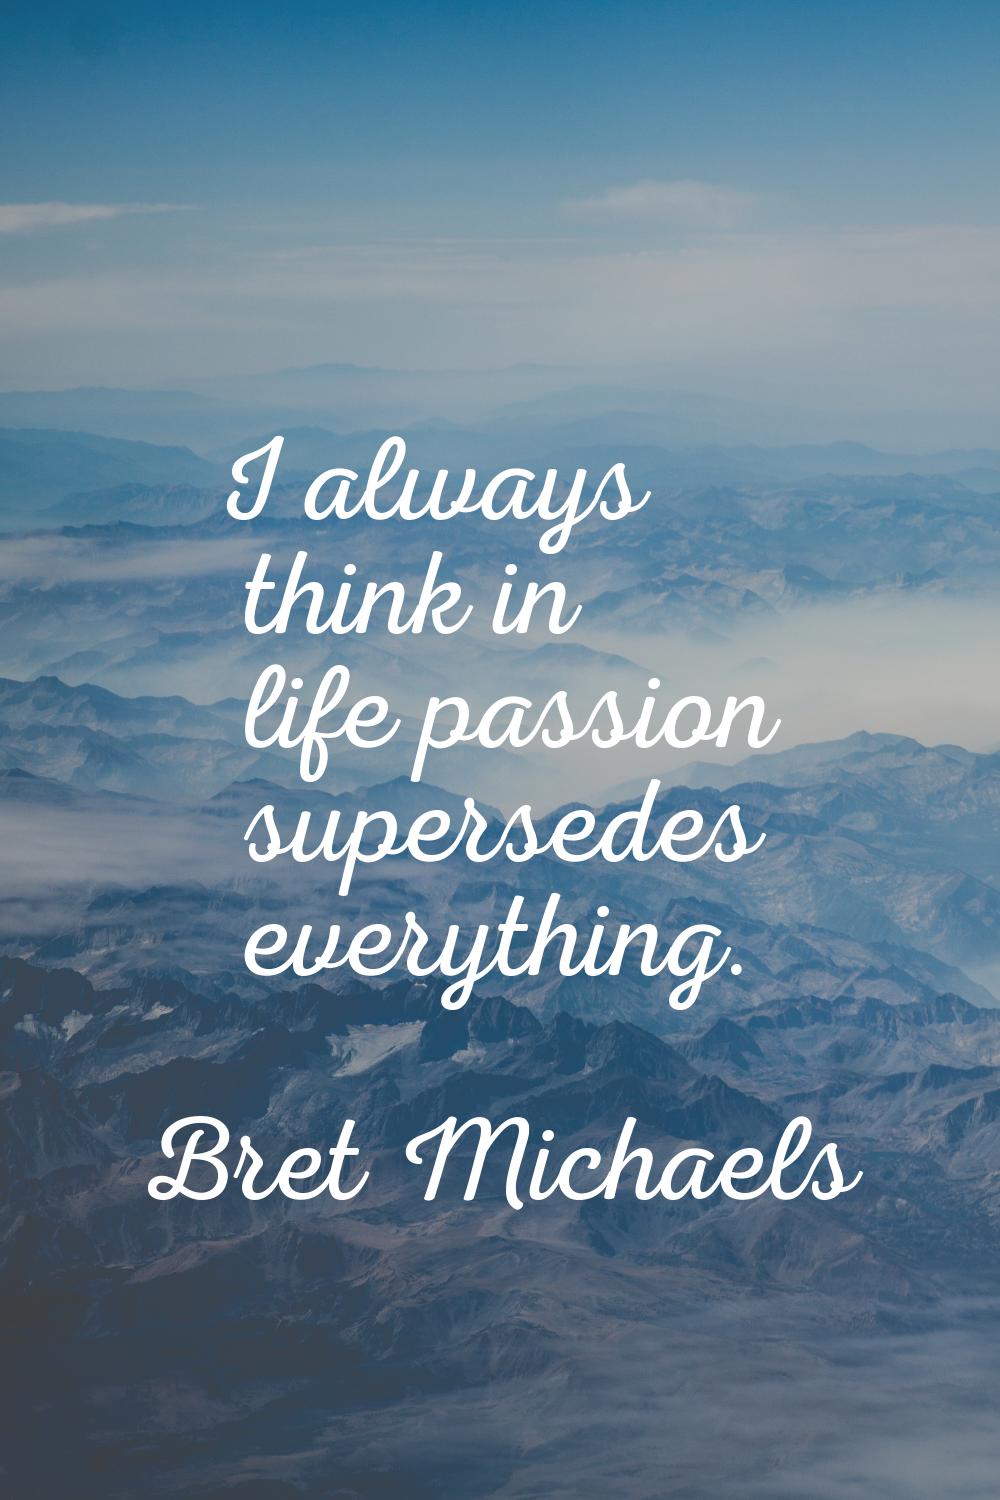 I always think in life passion supersedes everything.